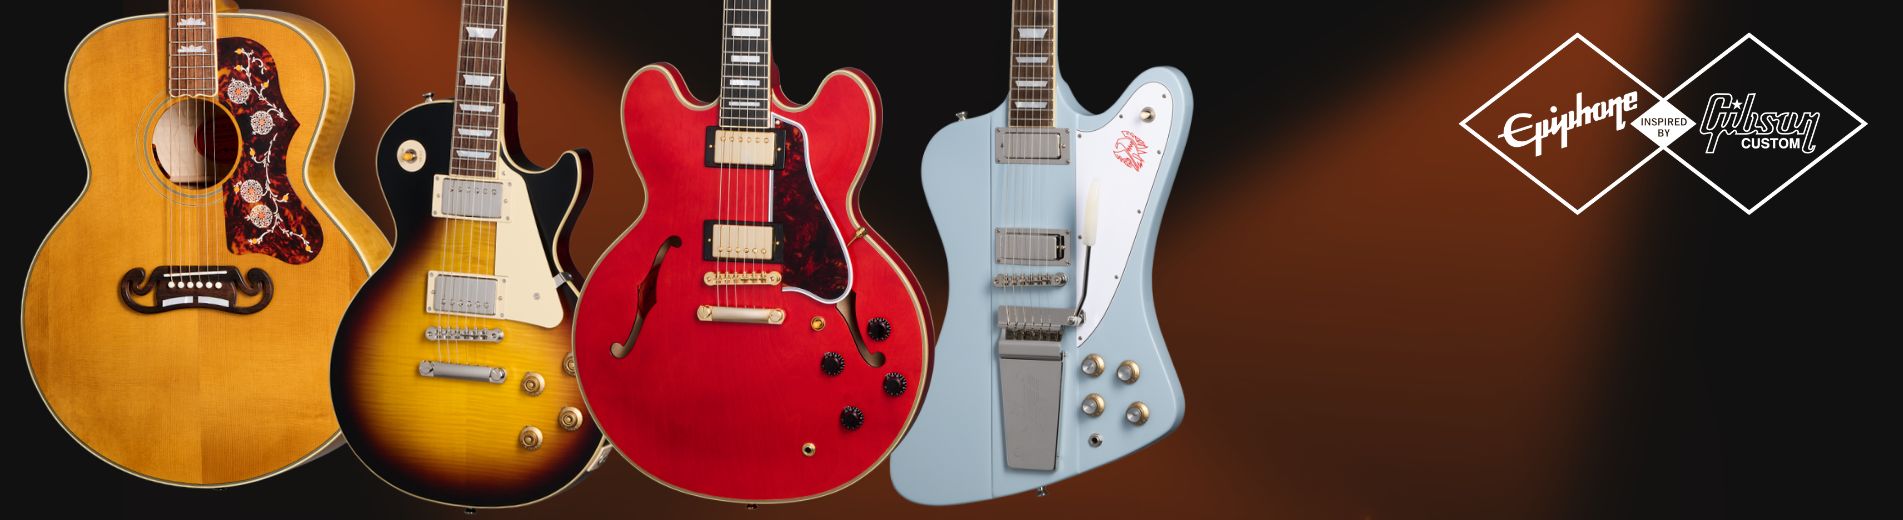 Epiphone Inspired By Gibson Custom Shop